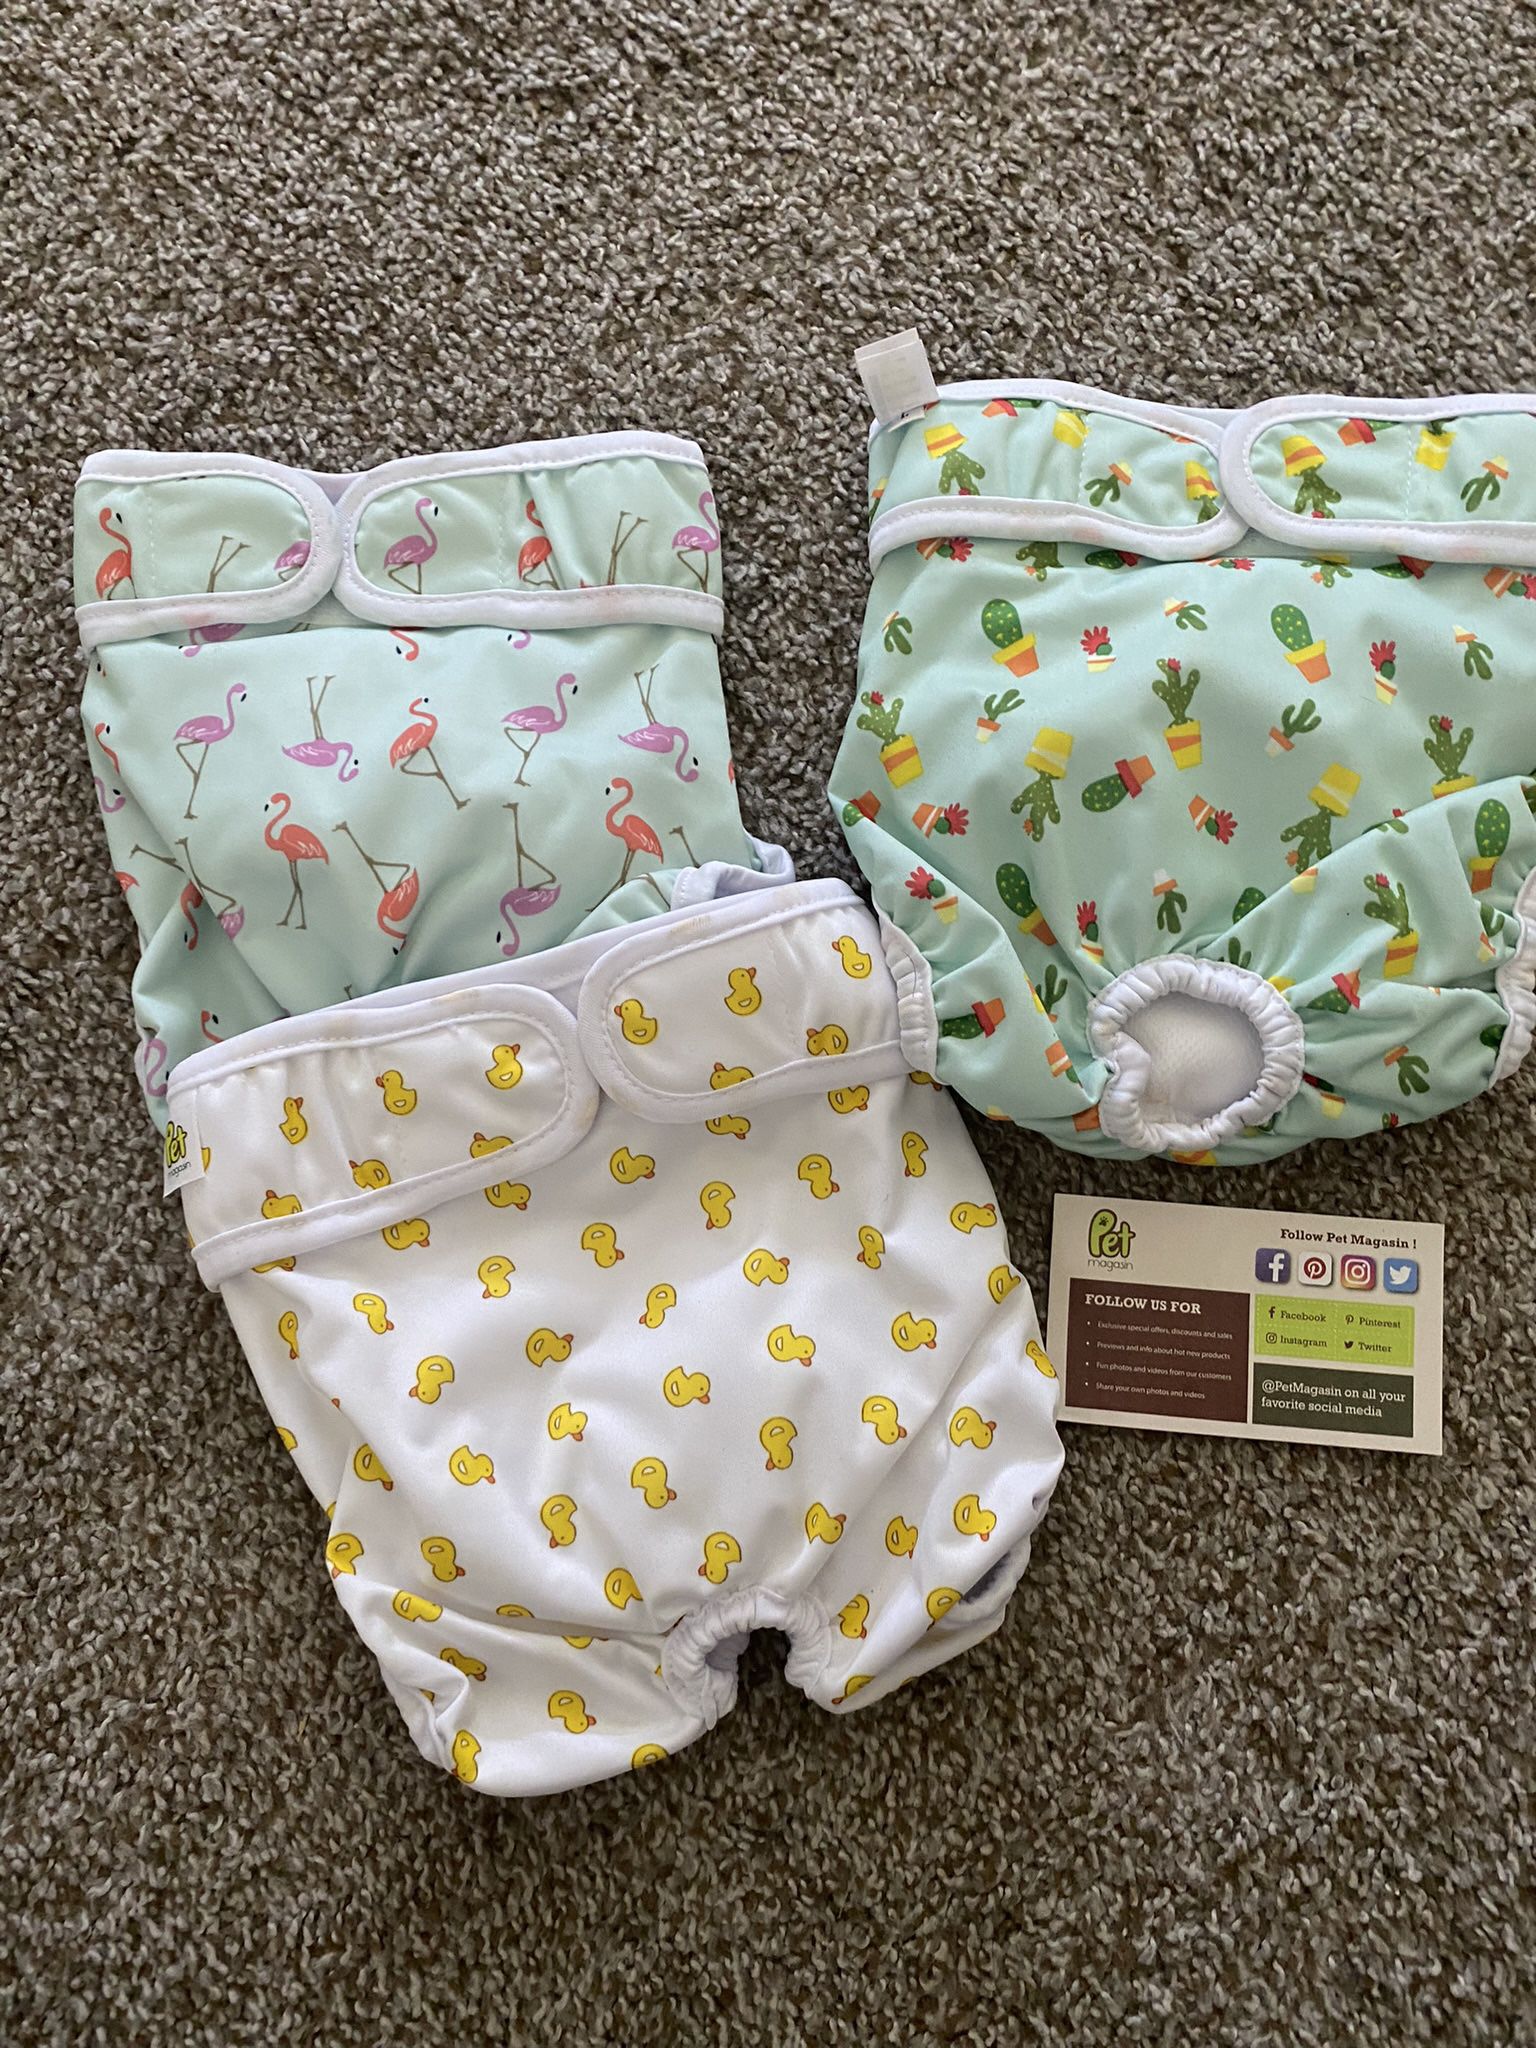 NWOT Large Dog Diapers